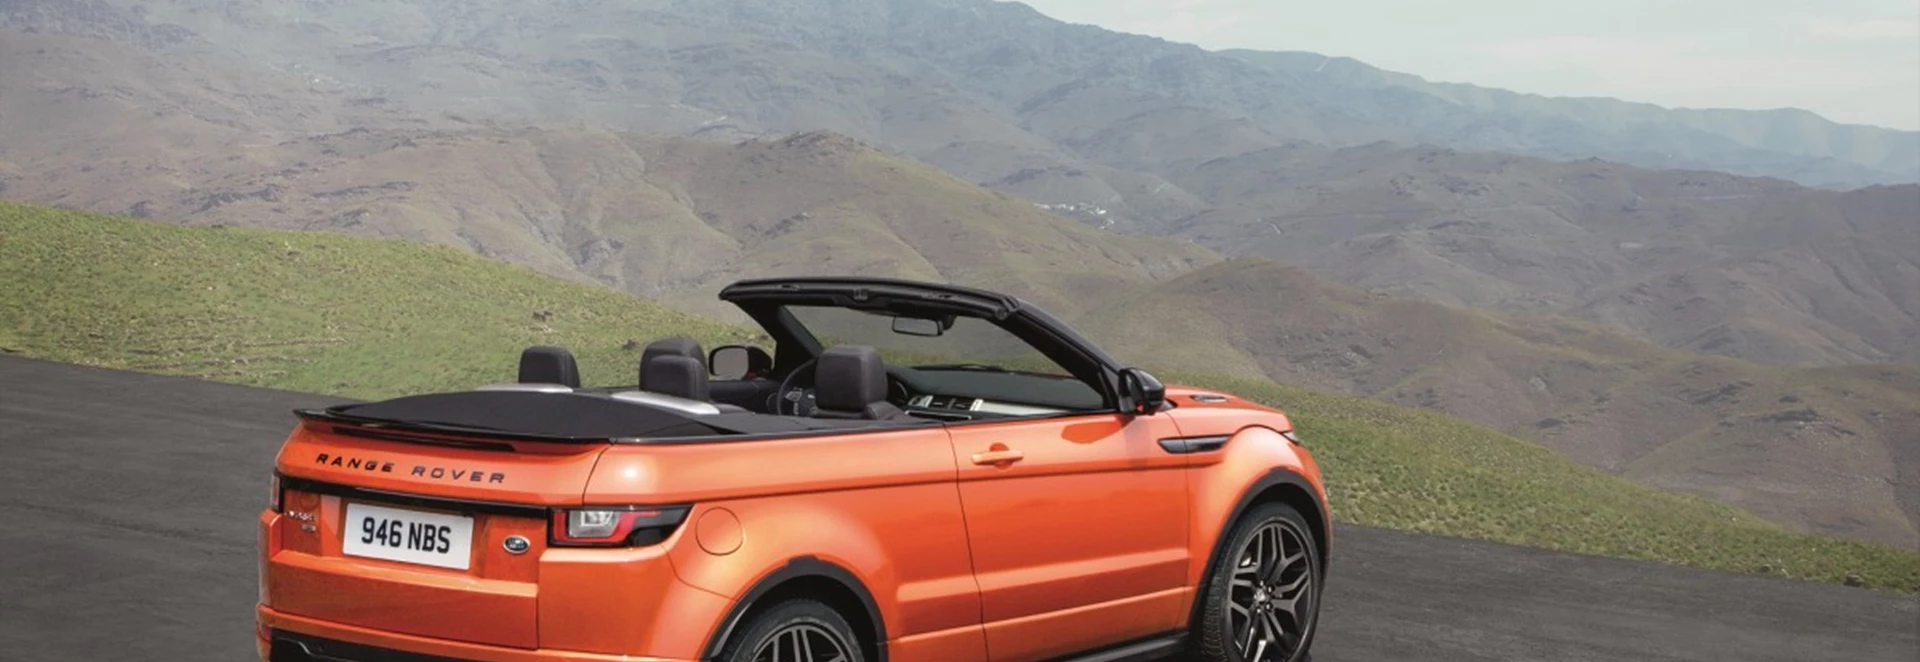 Going topless – a look at the new Range Rover Evoque Convertible